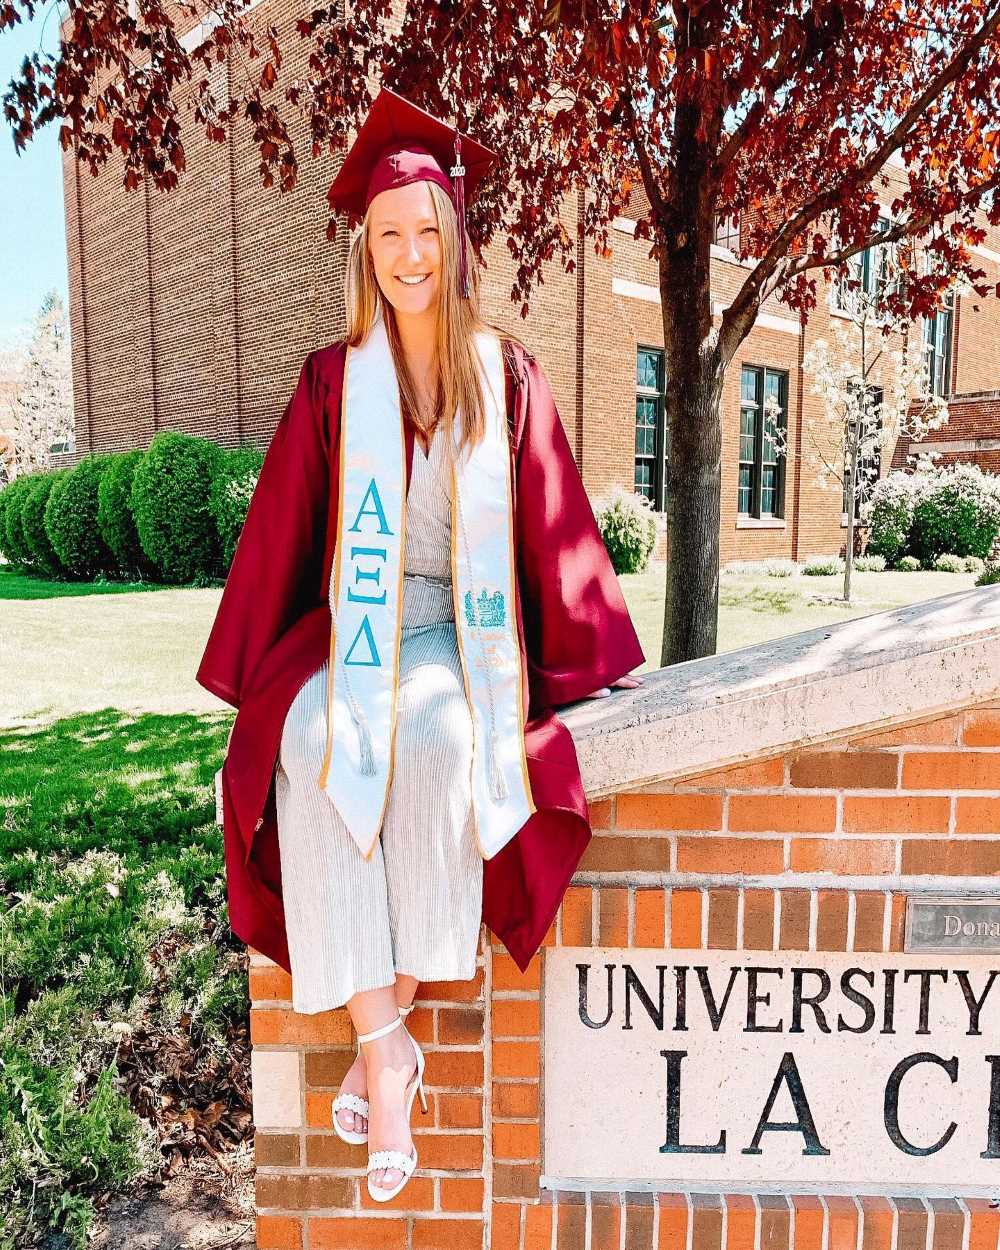 An Alpha Xi Delta woman poses in front of a university building wearing her cap and gown, and sorority stole.